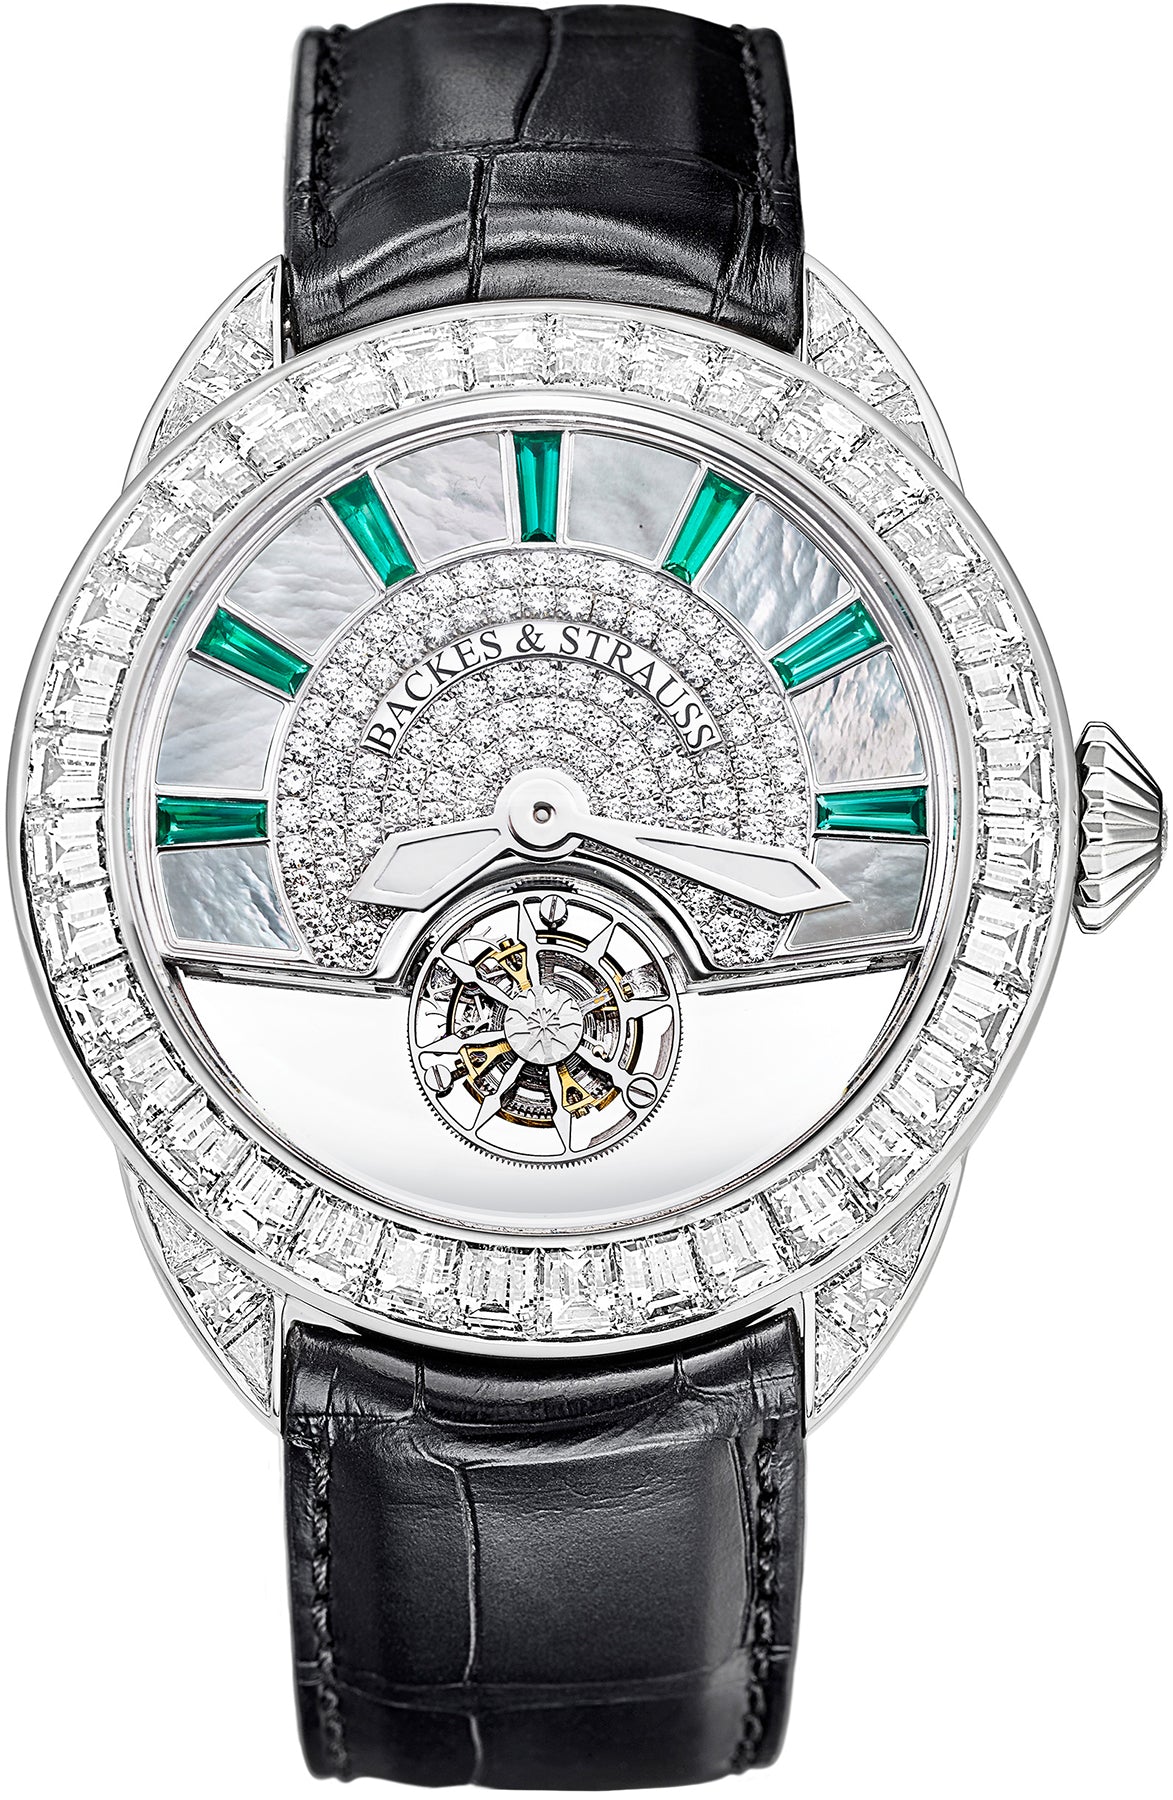 BackesandStrauss Watch Piccadilly King Tourbillon 45